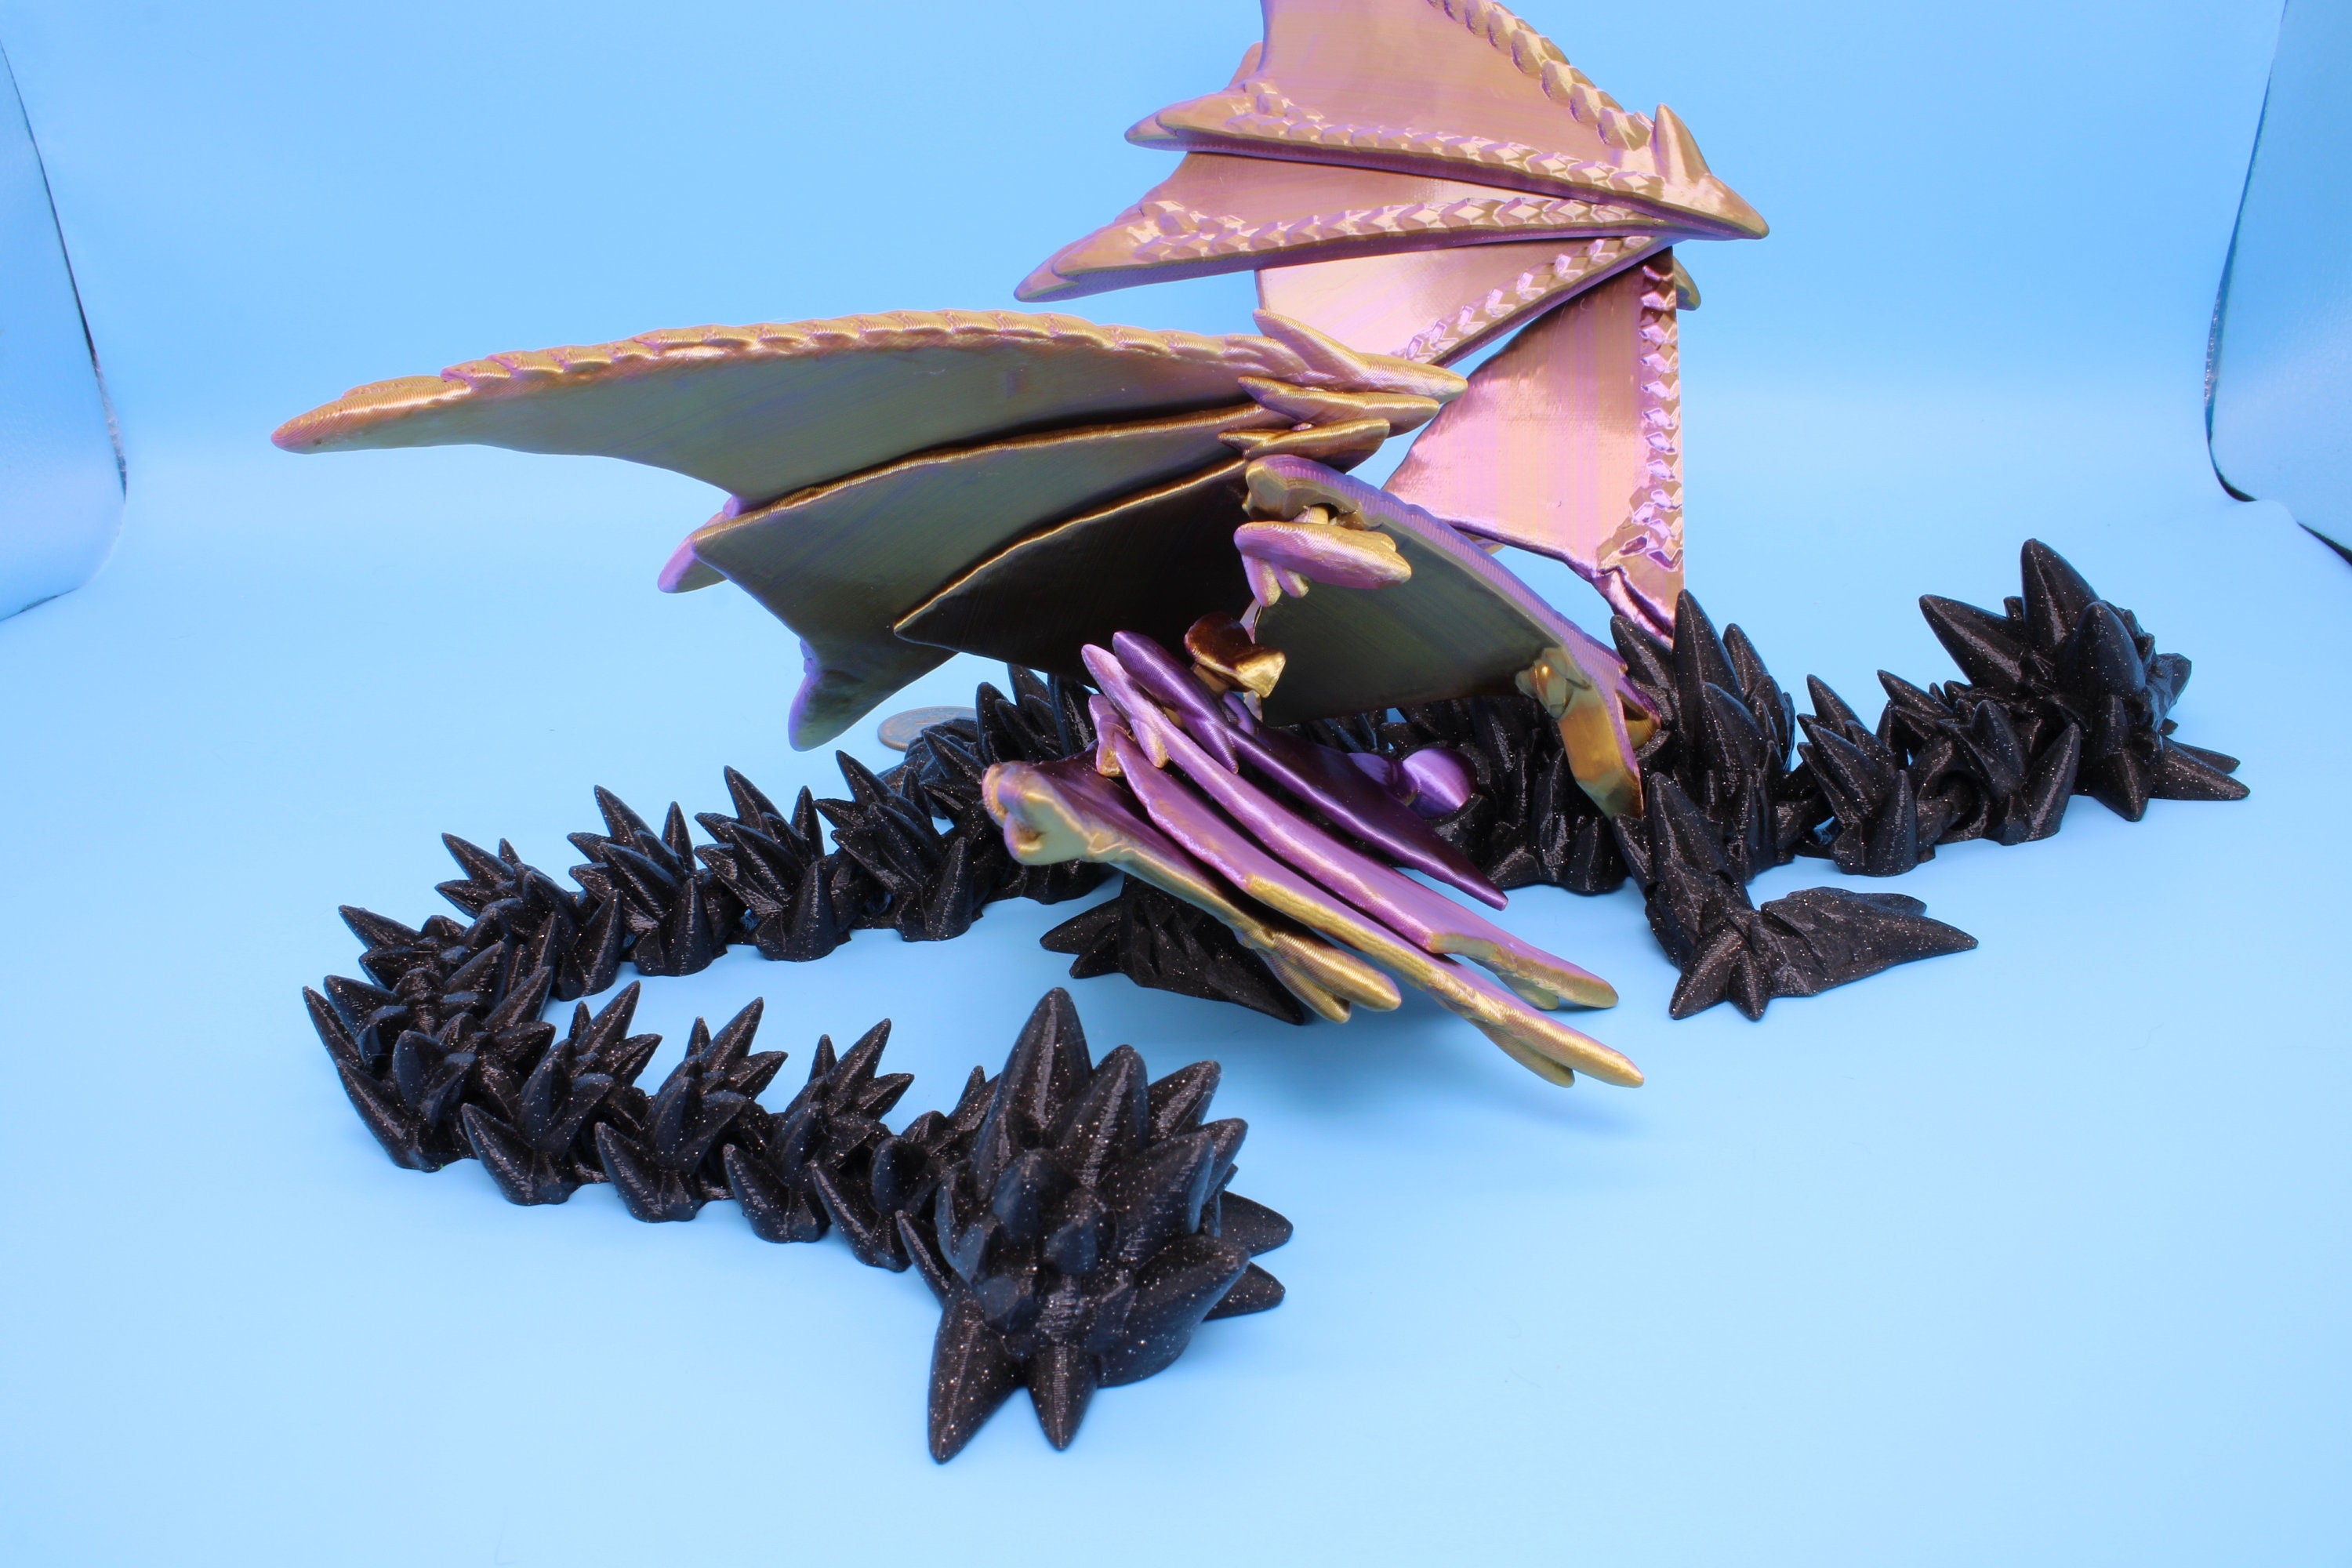 Spike Wing Dragon | 3D Printed Articulating Dragon 19 in.